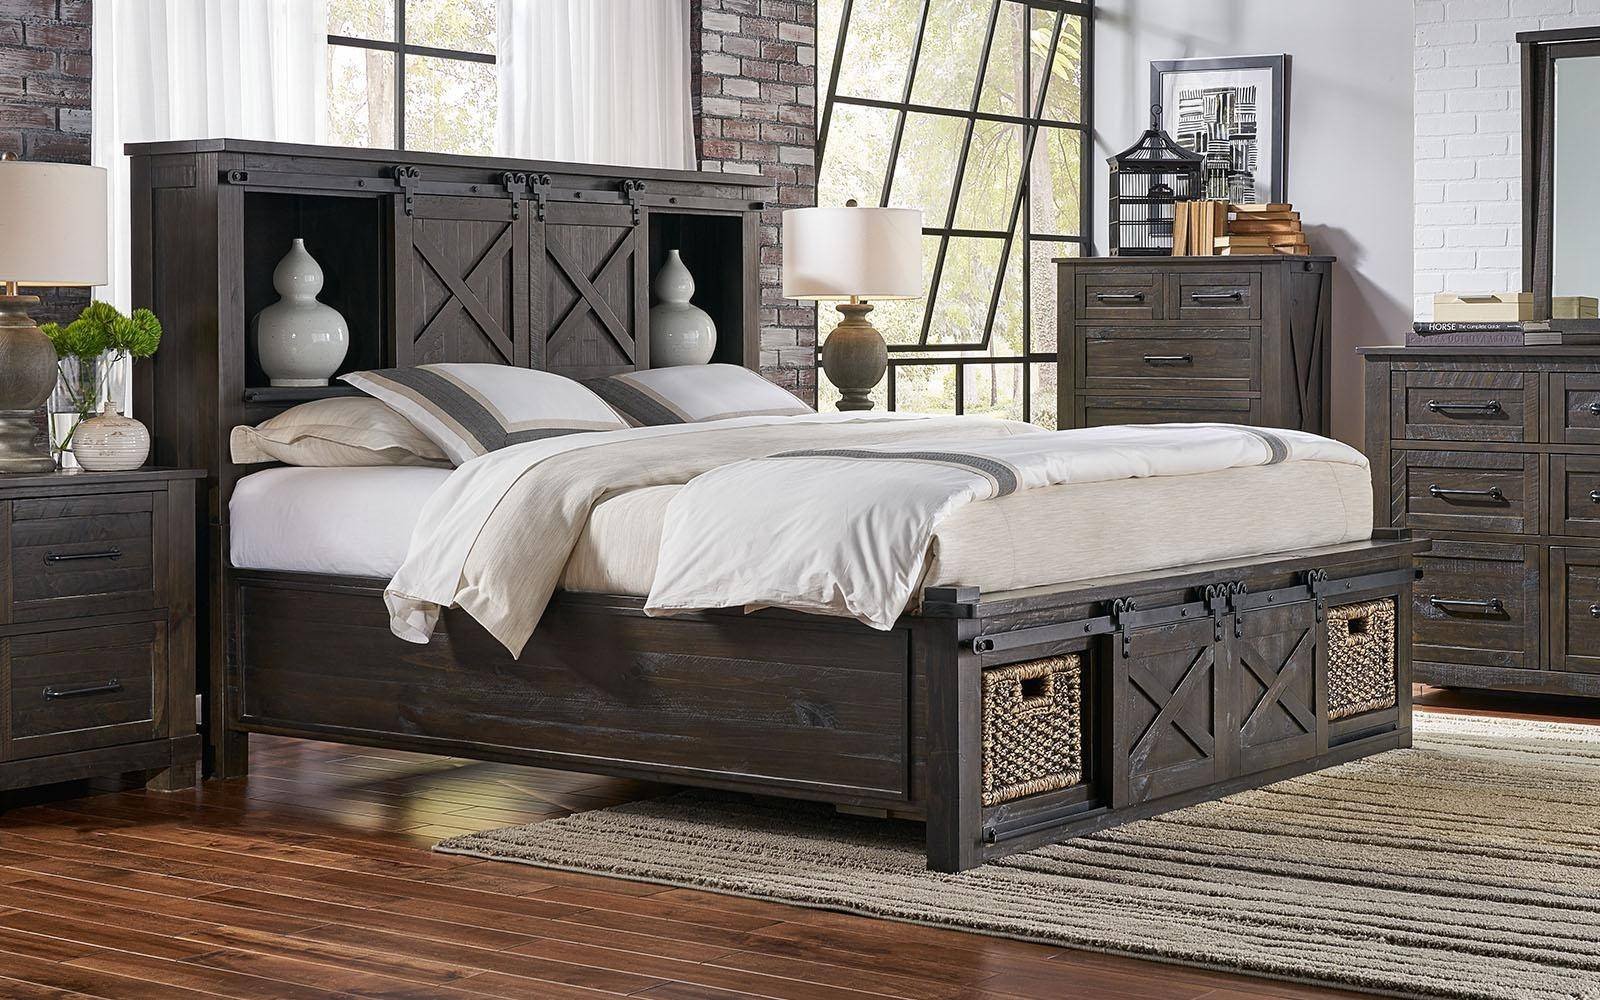 Rustic King Bedroom Set Awesome Rustic Queen Rotating Storage Bedroom Set 5pcs Suvcl5032 A